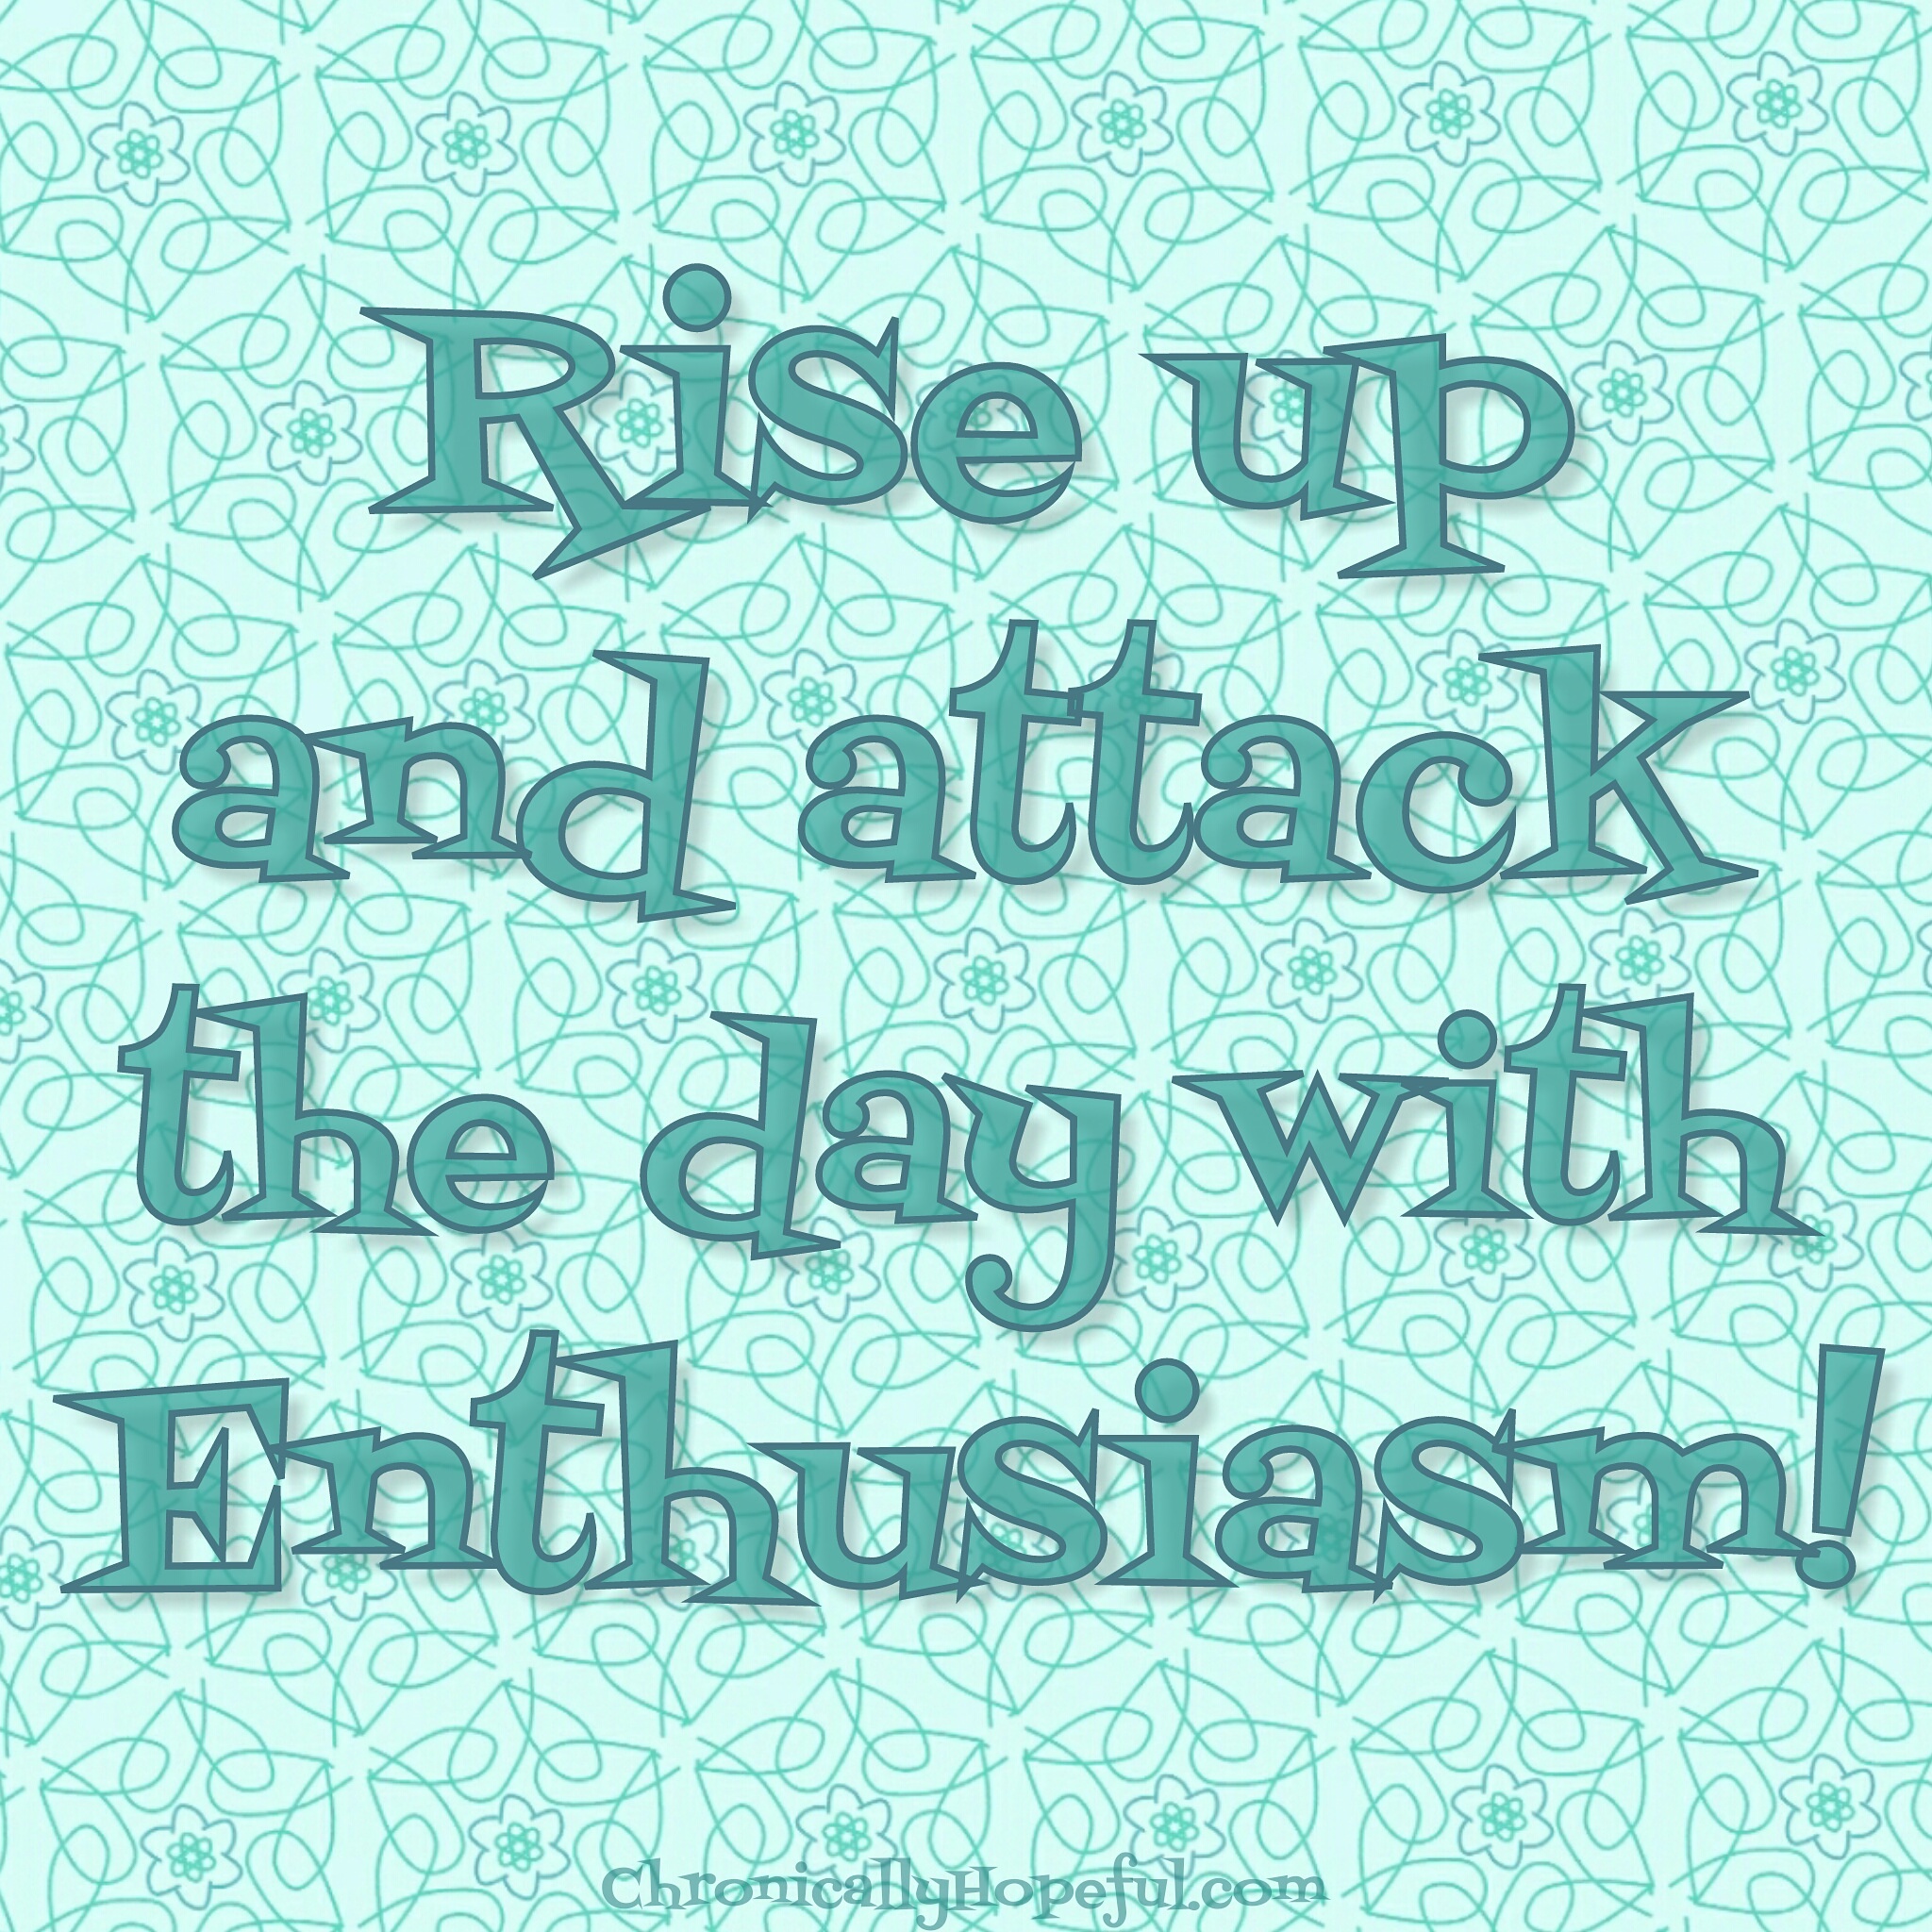 Attack the day with enthusiasm